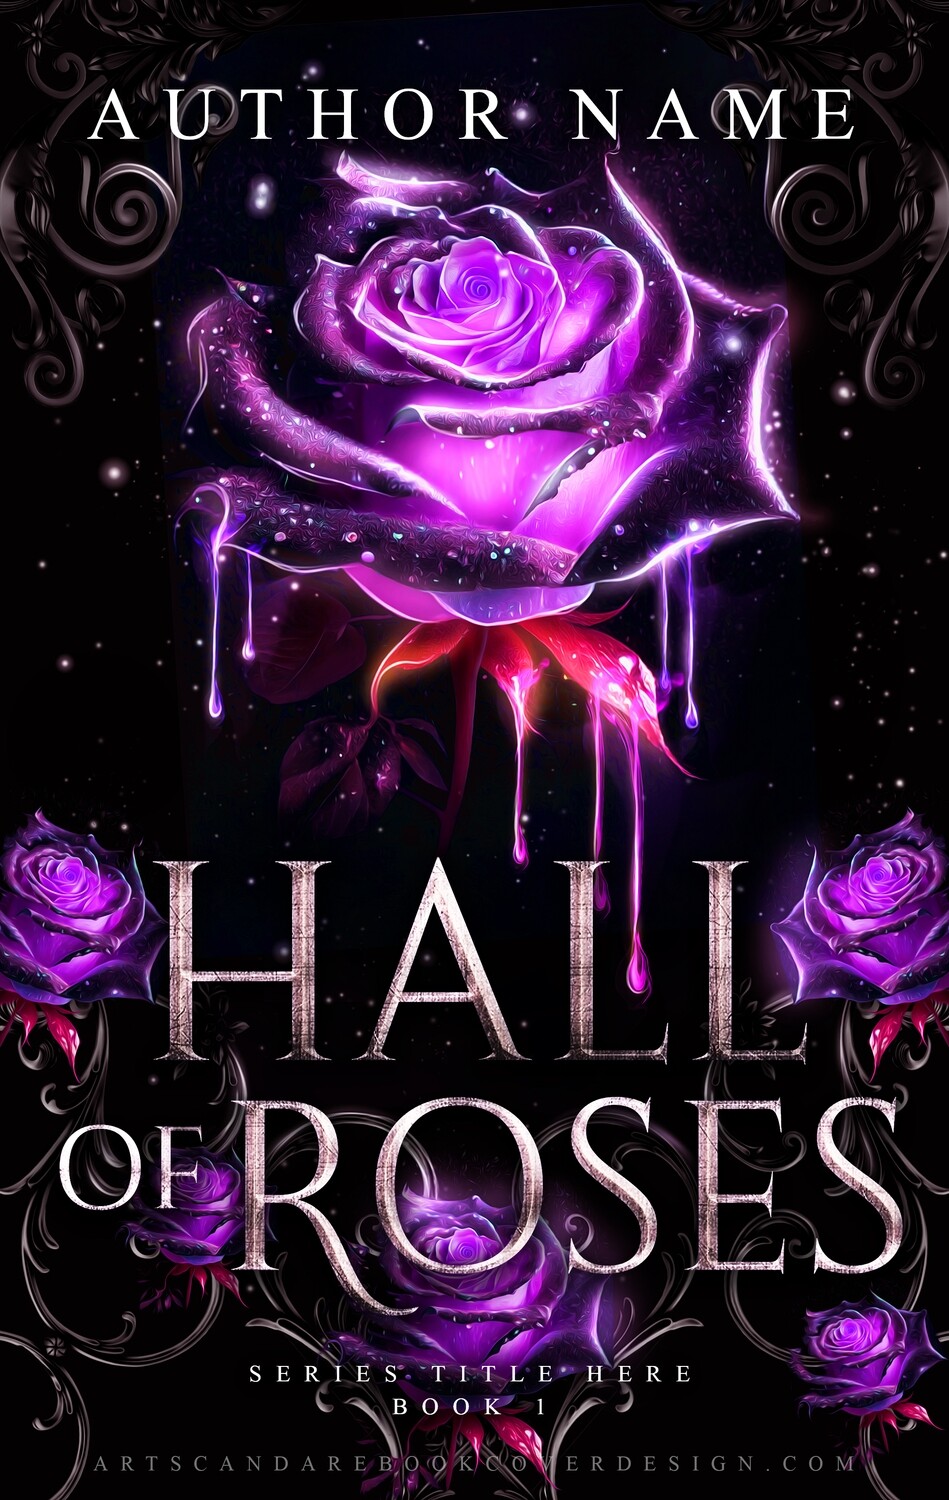 HALL OF ROSES